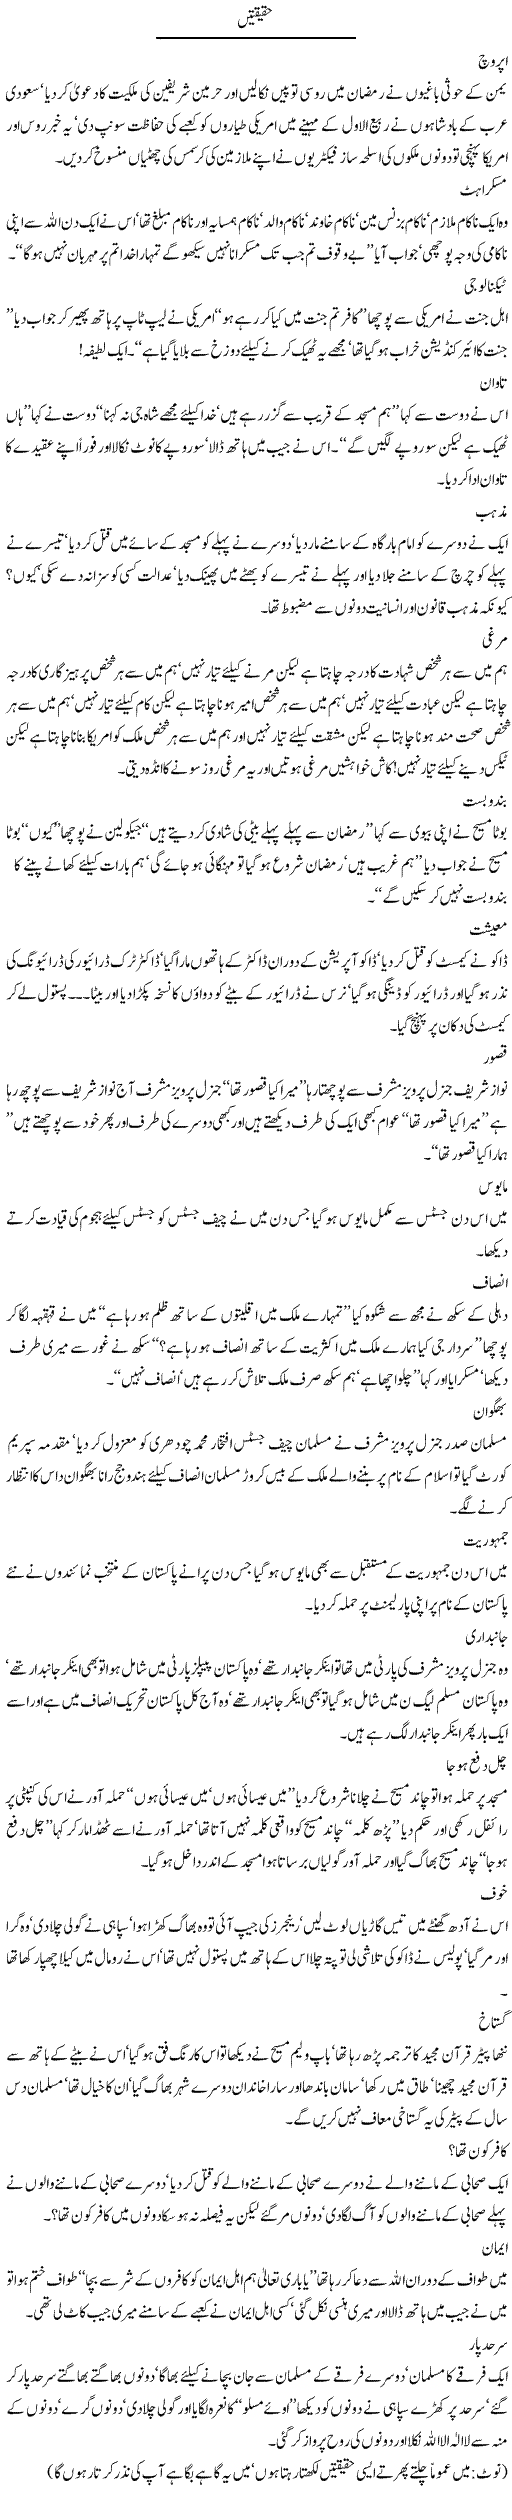 Haqeeqaten By Javed Chaudhry